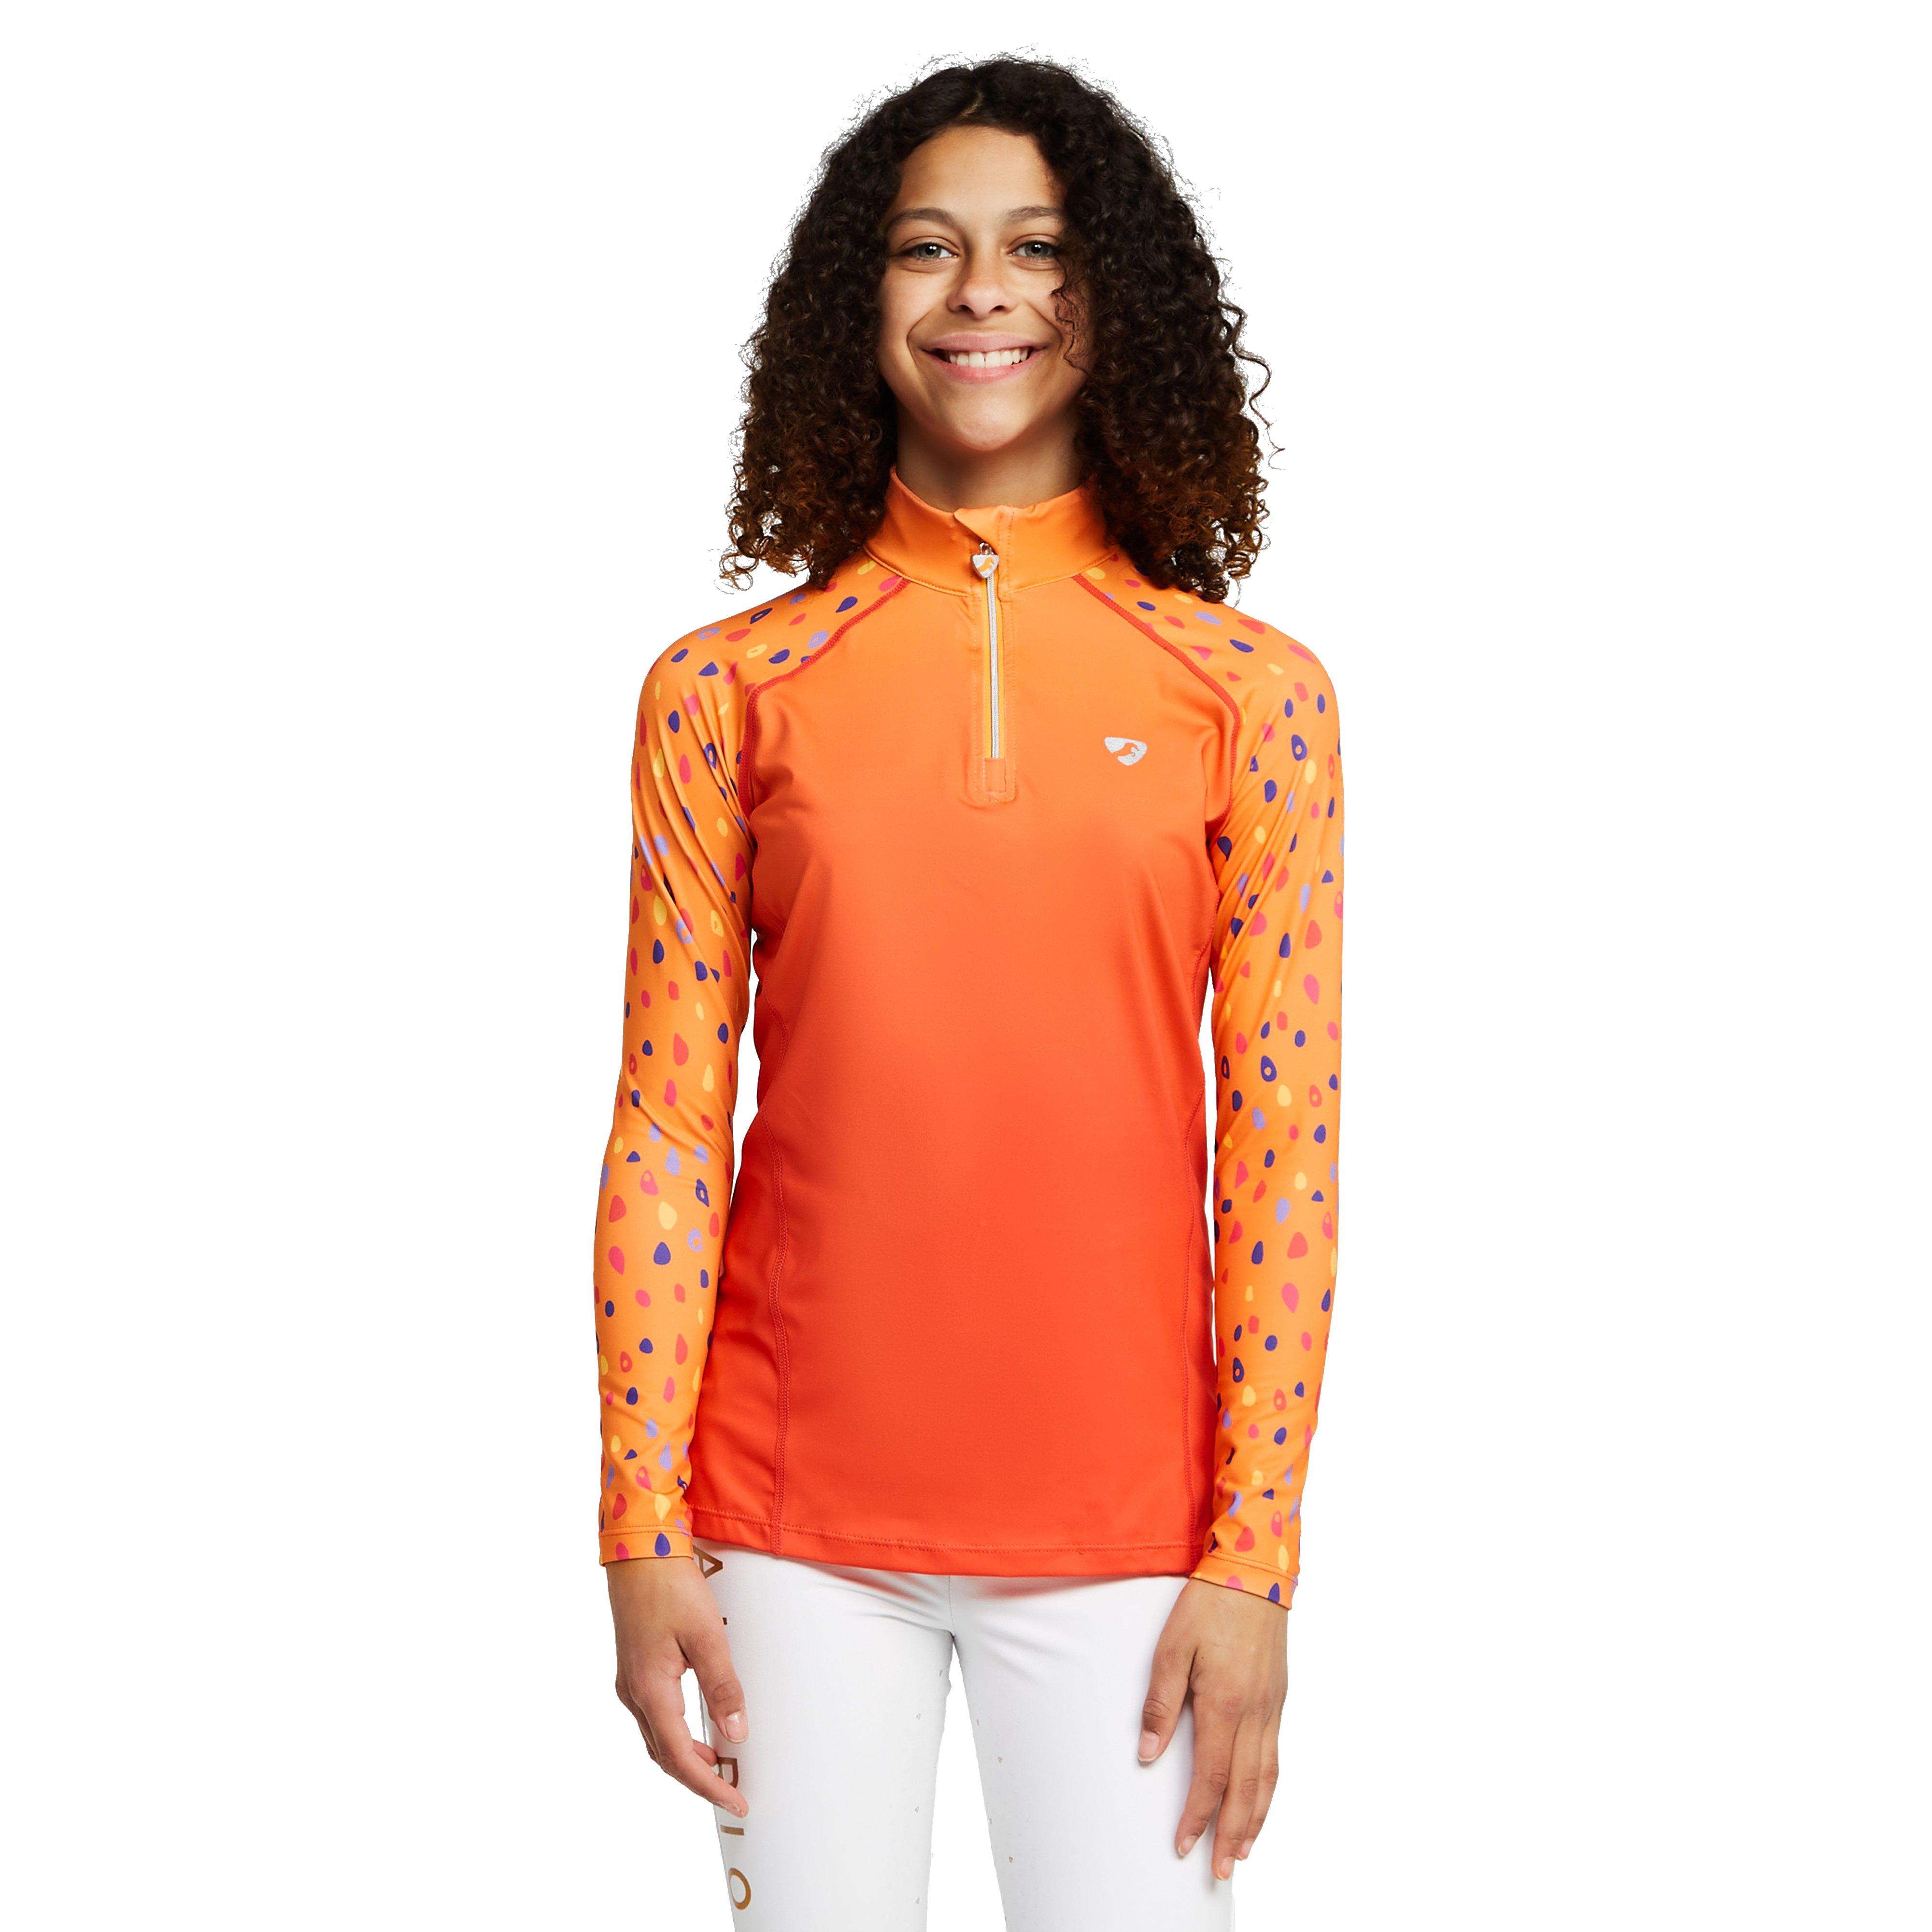 Young Rider Hyde Park Cross Country Shirt Orange Spot